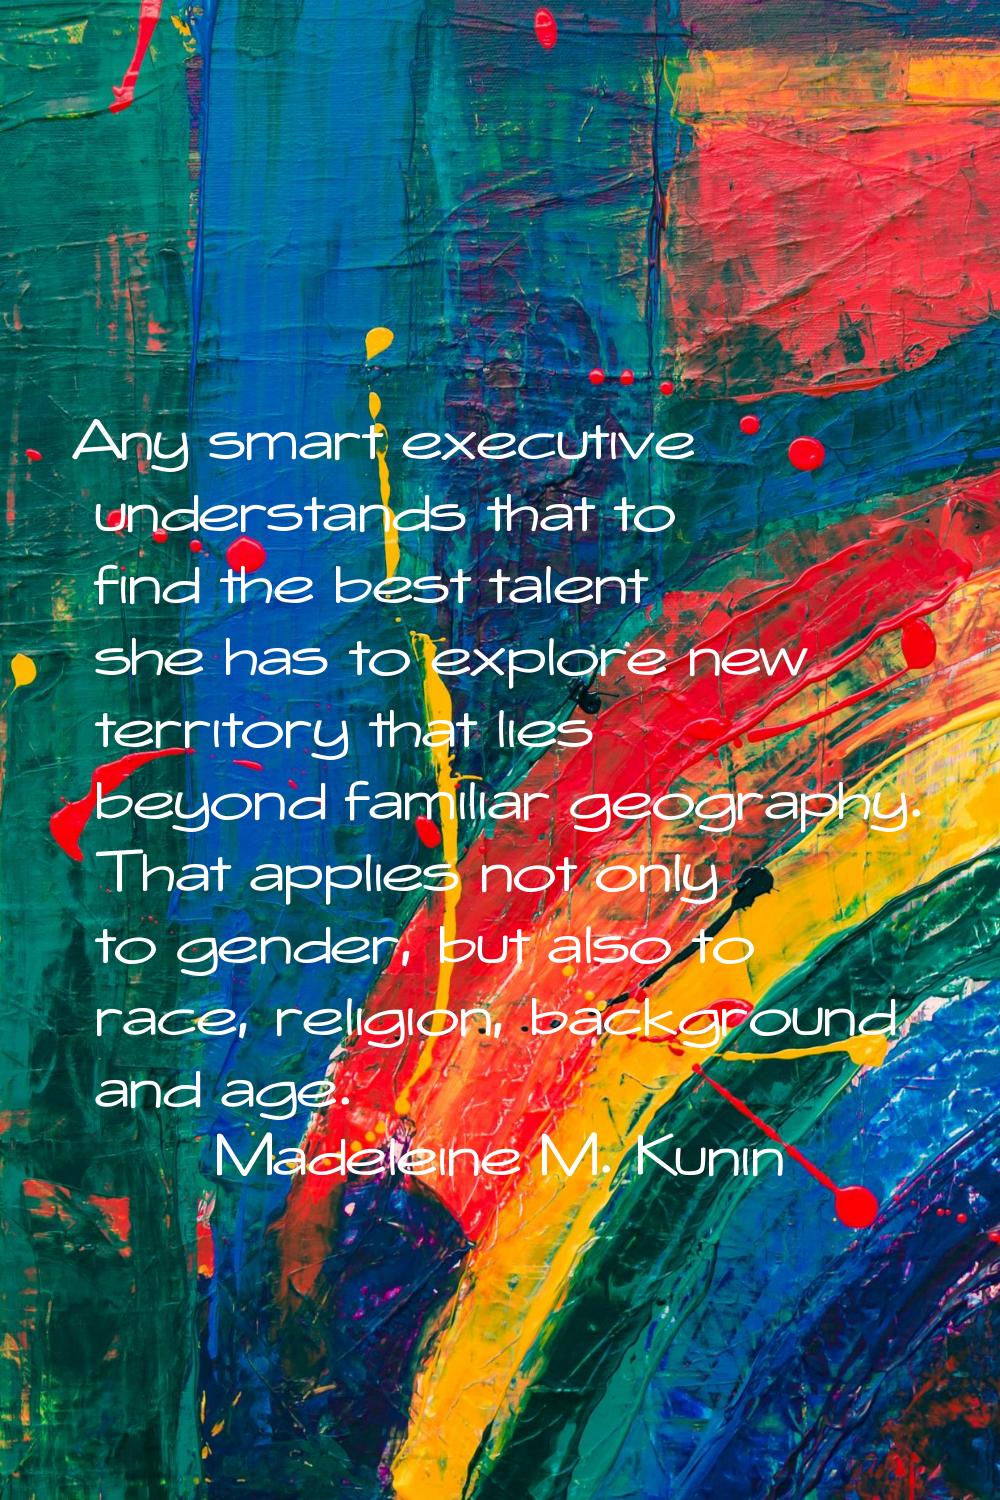 Any smart executive understands that to find the best talent she has to explore new territory that 